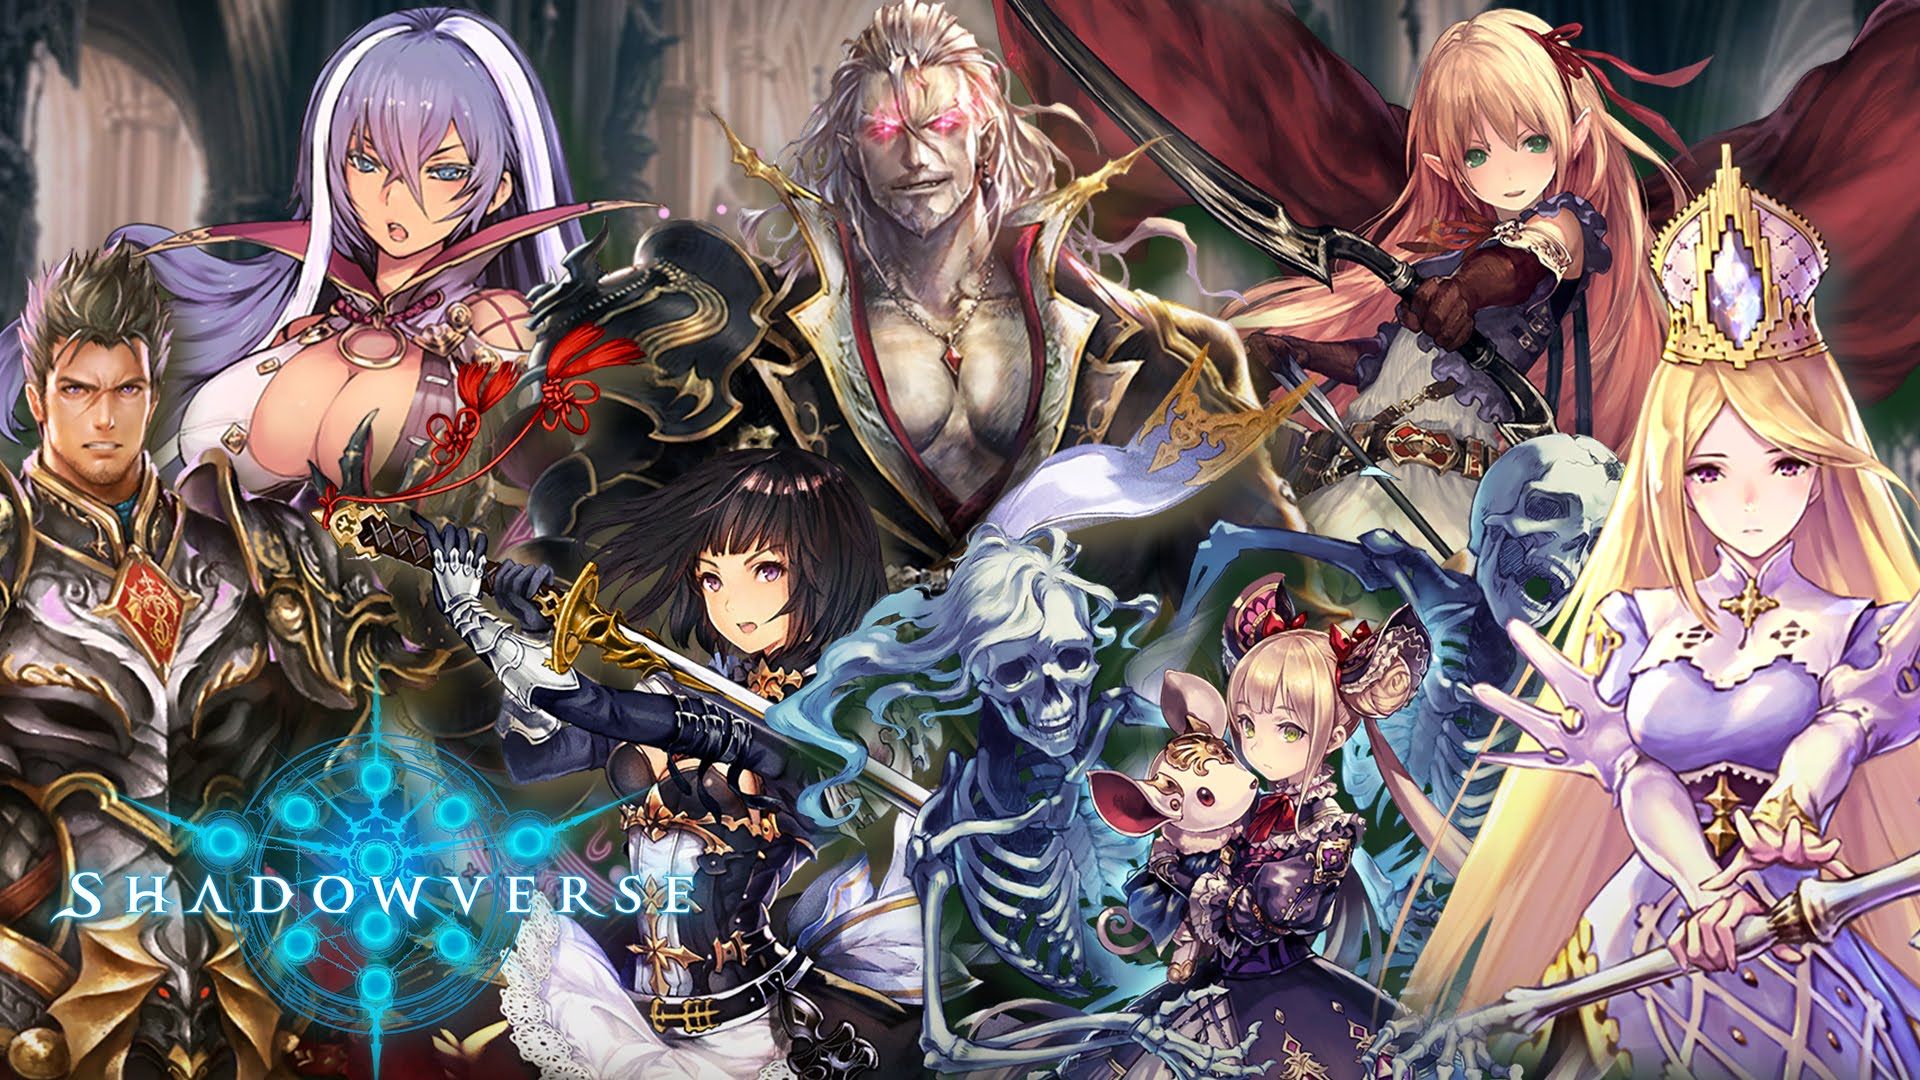  Shadowverse Anime  Wallpapers Wallpaper Cave